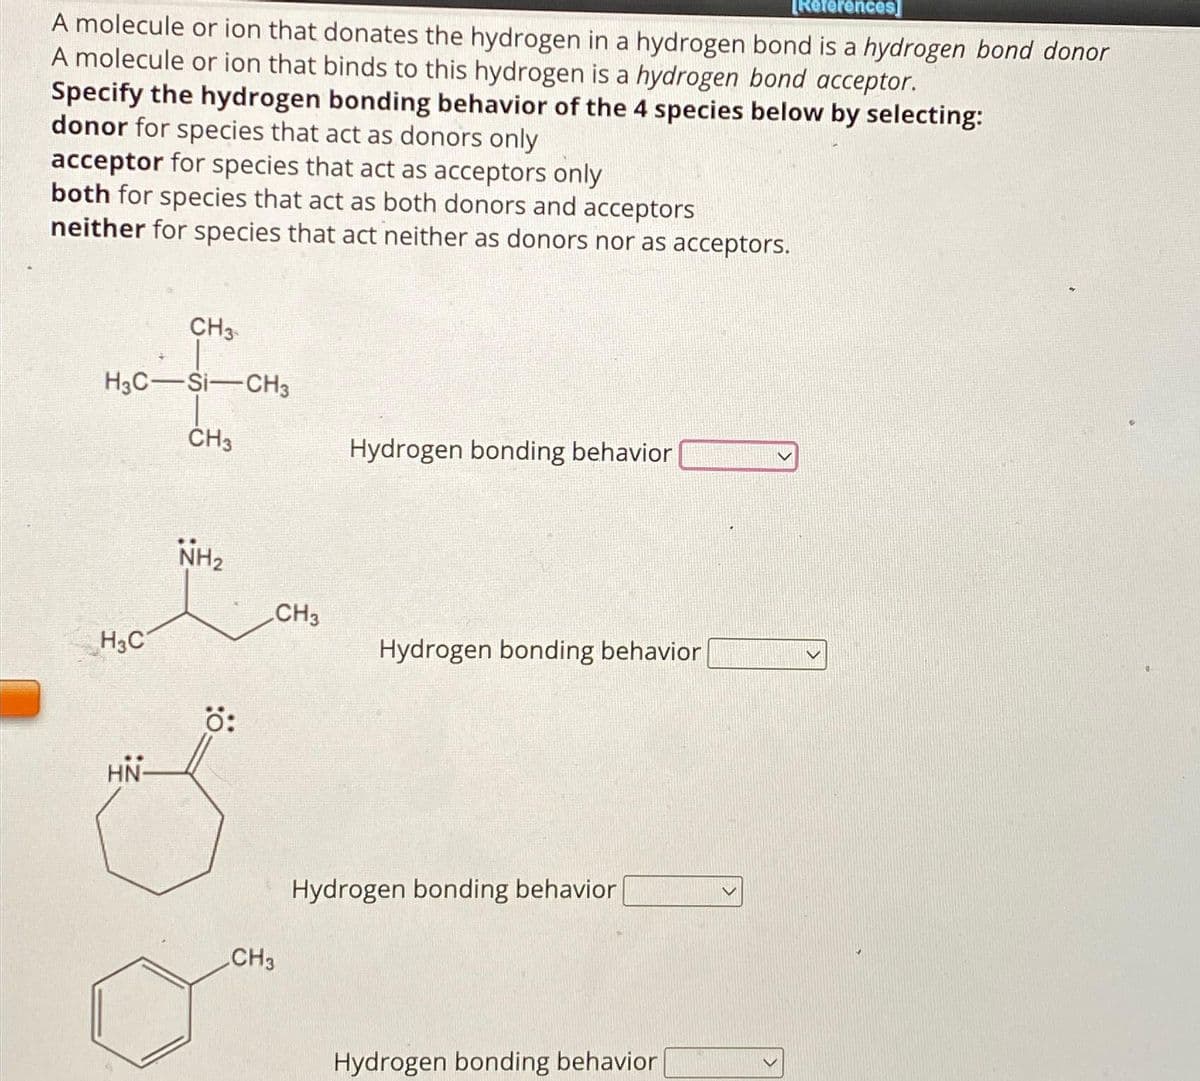 [References]
A molecule or ion that donates the hydrogen in a hydrogen bond is a hydrogen bond donor
A molecule or ion that binds to this hydrogen is a hydrogen bond acceptor.
Specify the hydrogen bonding behavior of the 4 species below by selecting:
donor for species that act as donors only
acceptor for species that act as acceptors only
both for species that act as both donors and acceptors
neither for species that act neither as donors nor as acceptors.
CH3
H3C-SI-CH3
CH3
H3C
HN
NH₂
Ö:
CH3
CH3
Hydrogen bonding behavior
Hydrogen bonding behavior
Hydrogen bonding behavior
Hydrogen bonding behavior